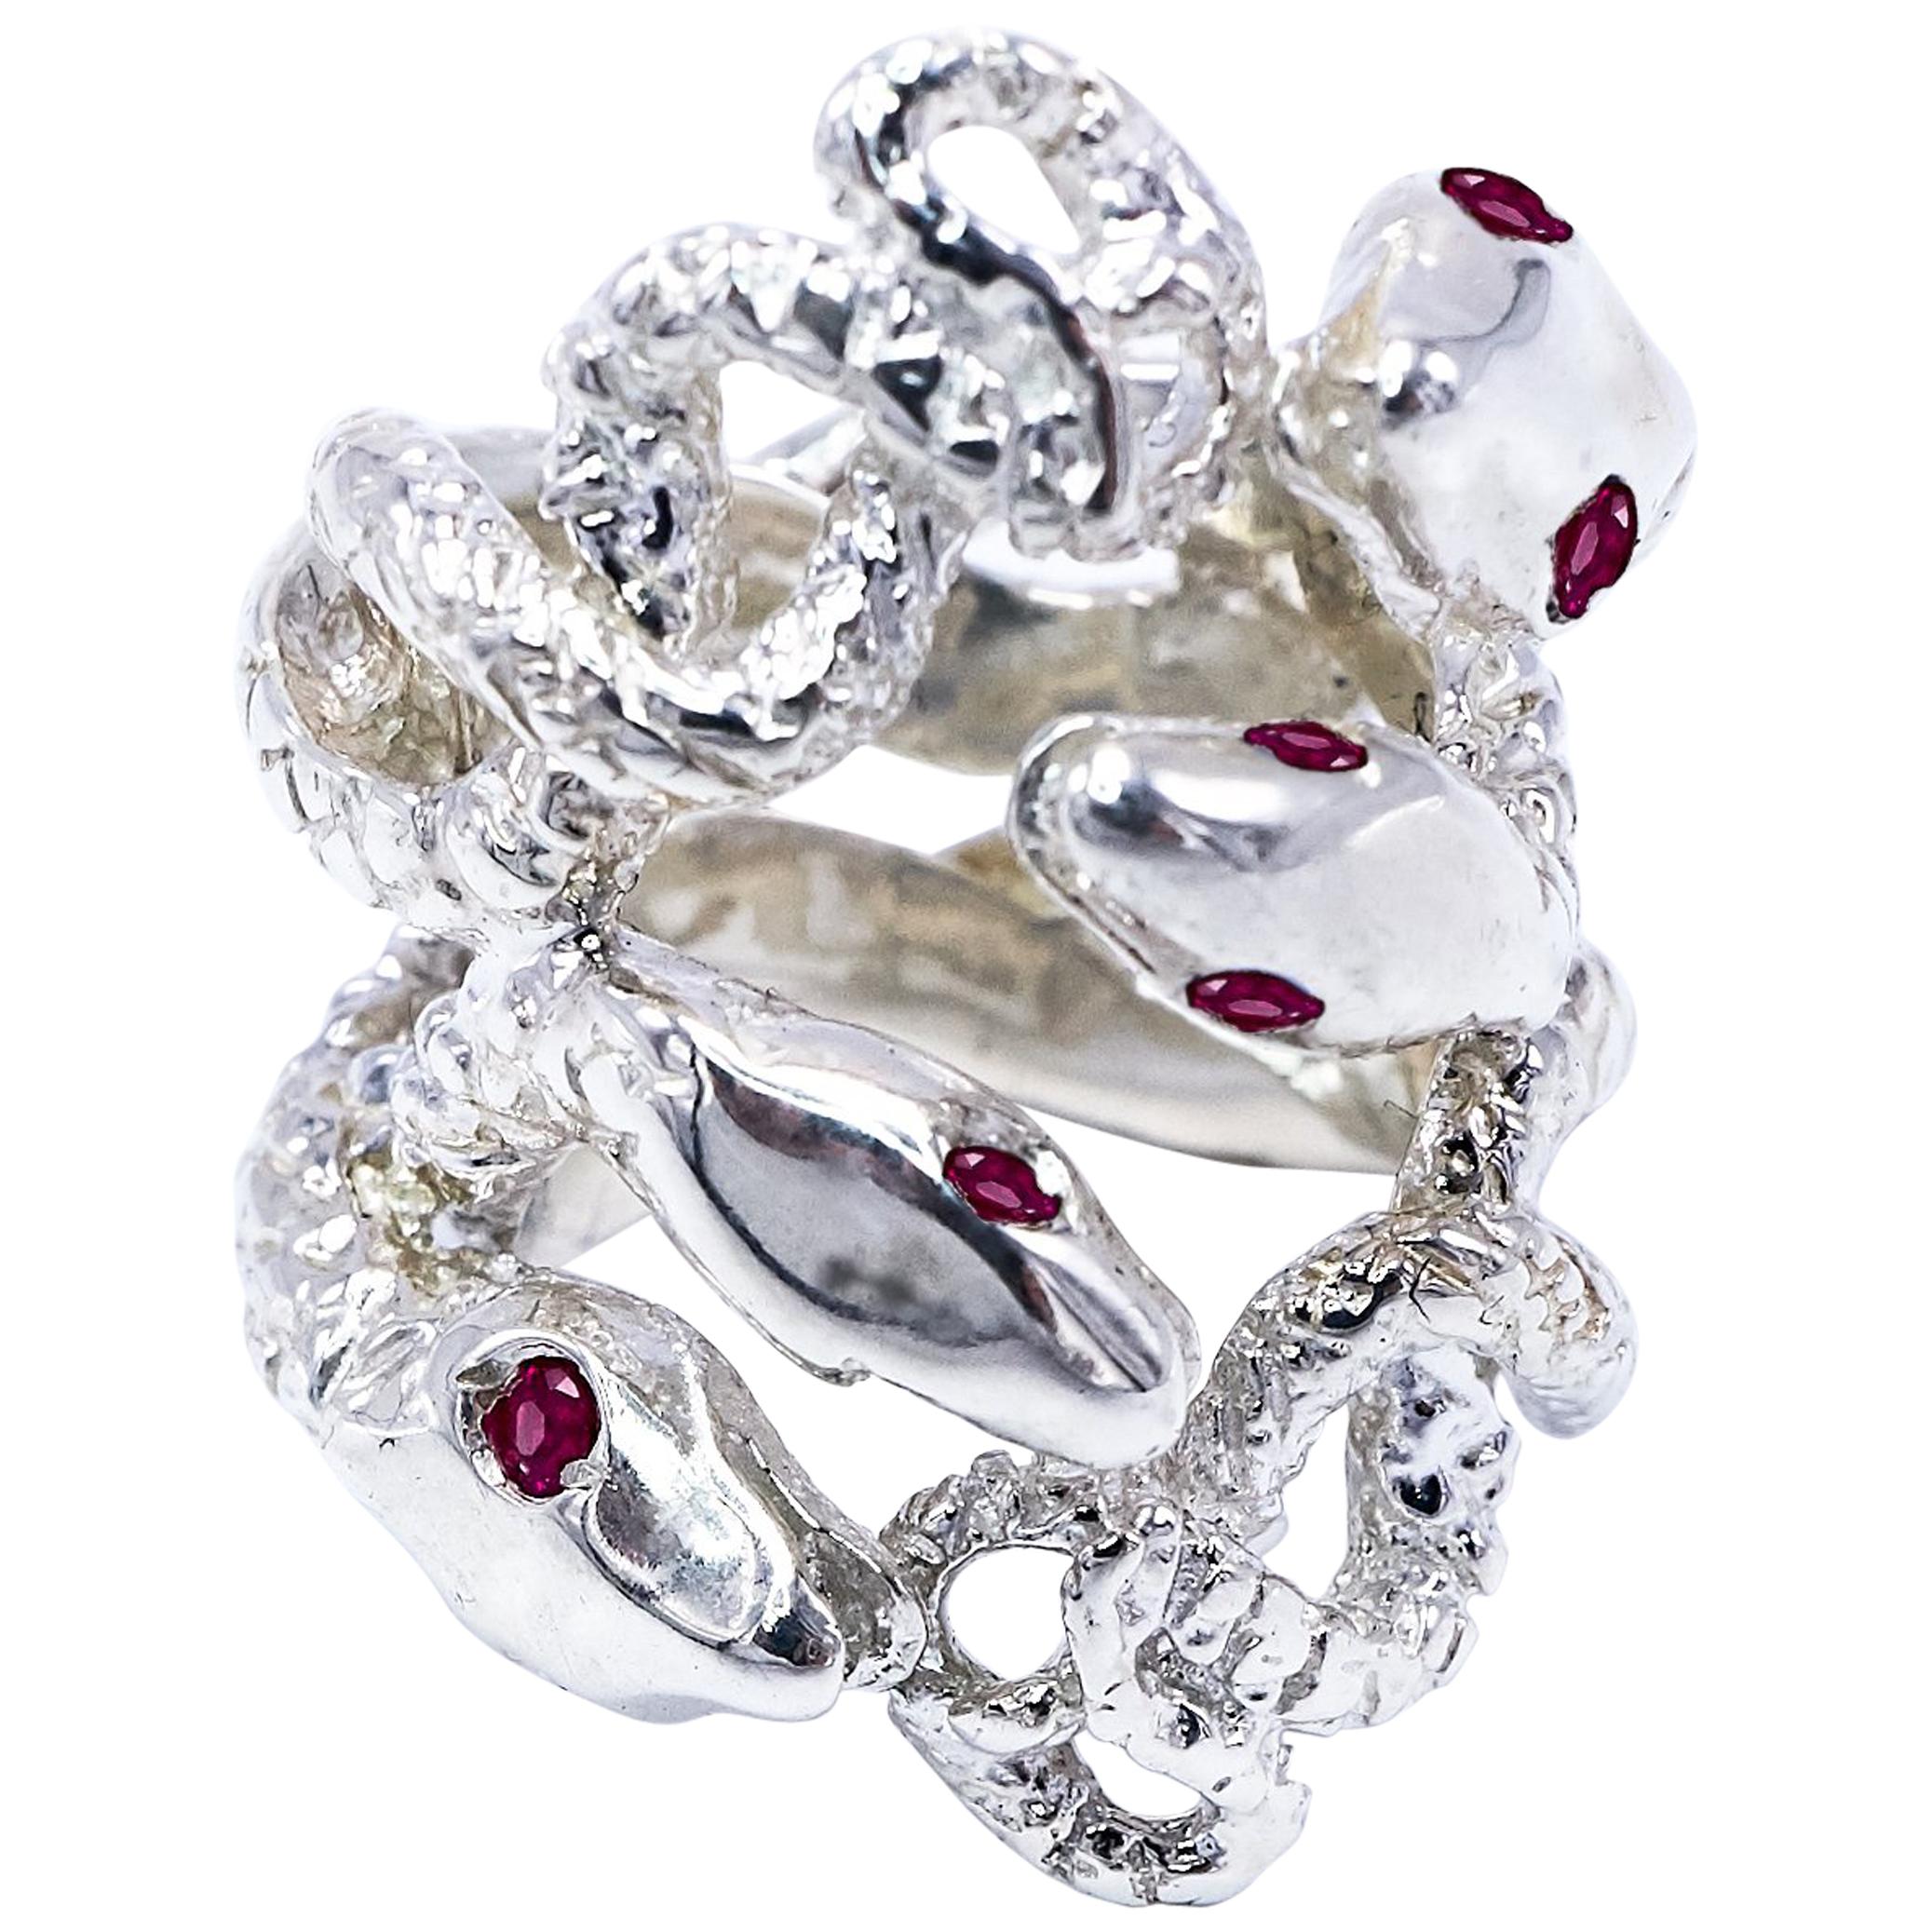 Ruby Snake Ring Silver Statement Cocktail Ring J Dauphin

J DAUPHIN 